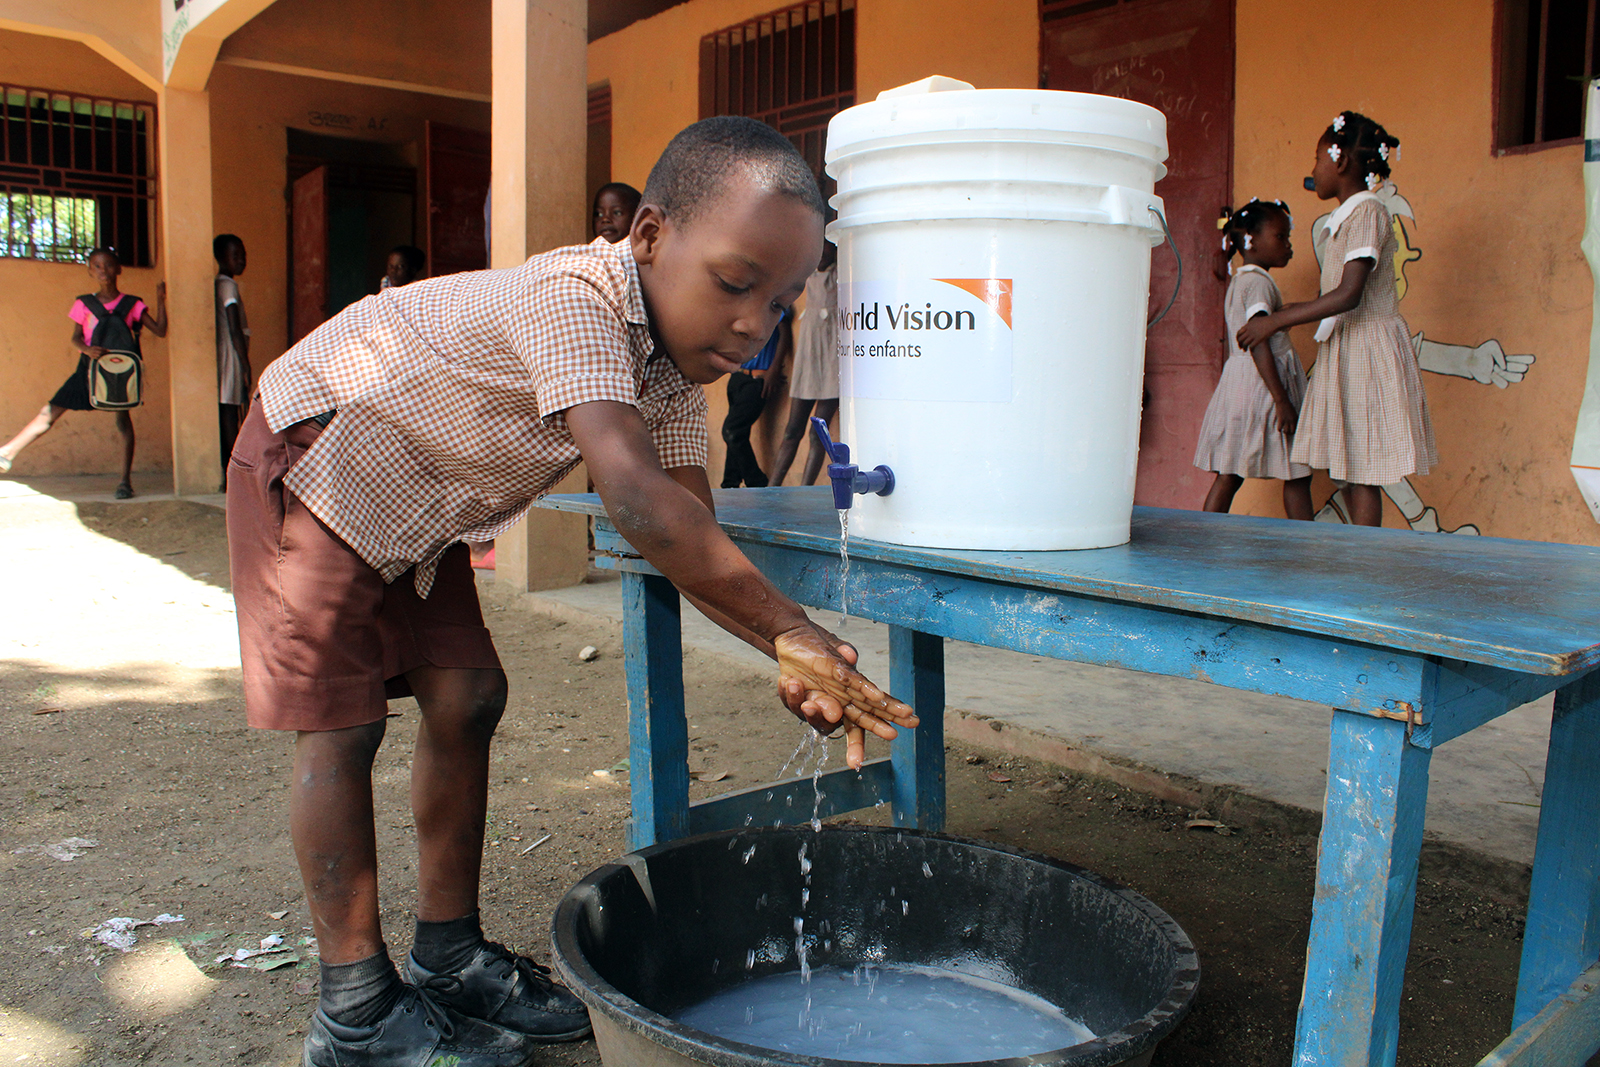 A young student washes his hands at a water station provided by World Vision in Haiti. Photo courtesy of World Vision